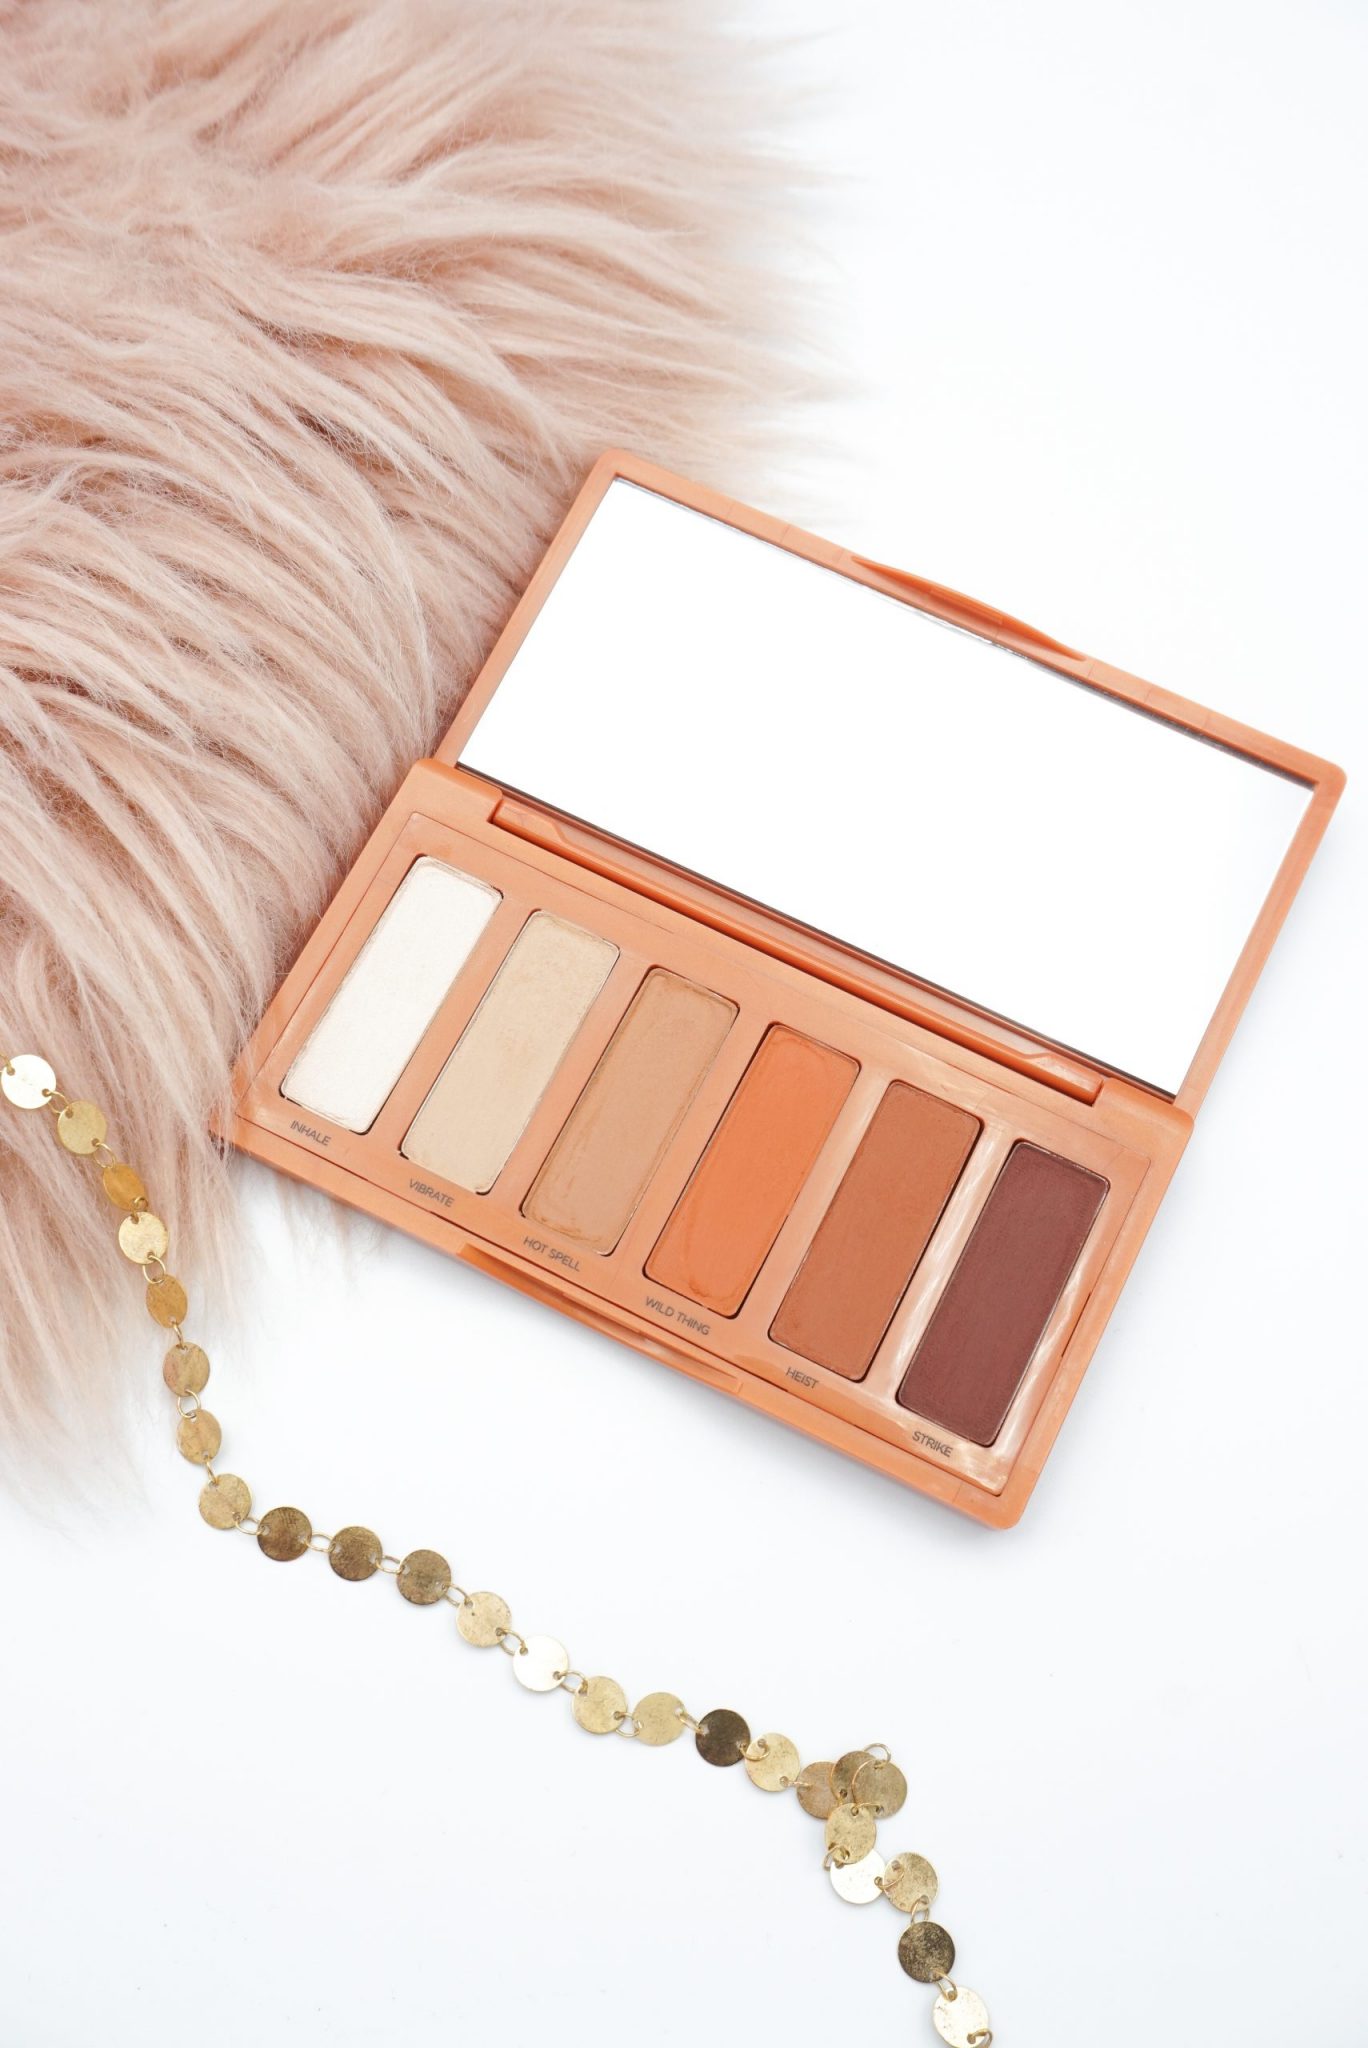 URBAN DECAY NAKED PETITE HEAT PALETTE REVIEW